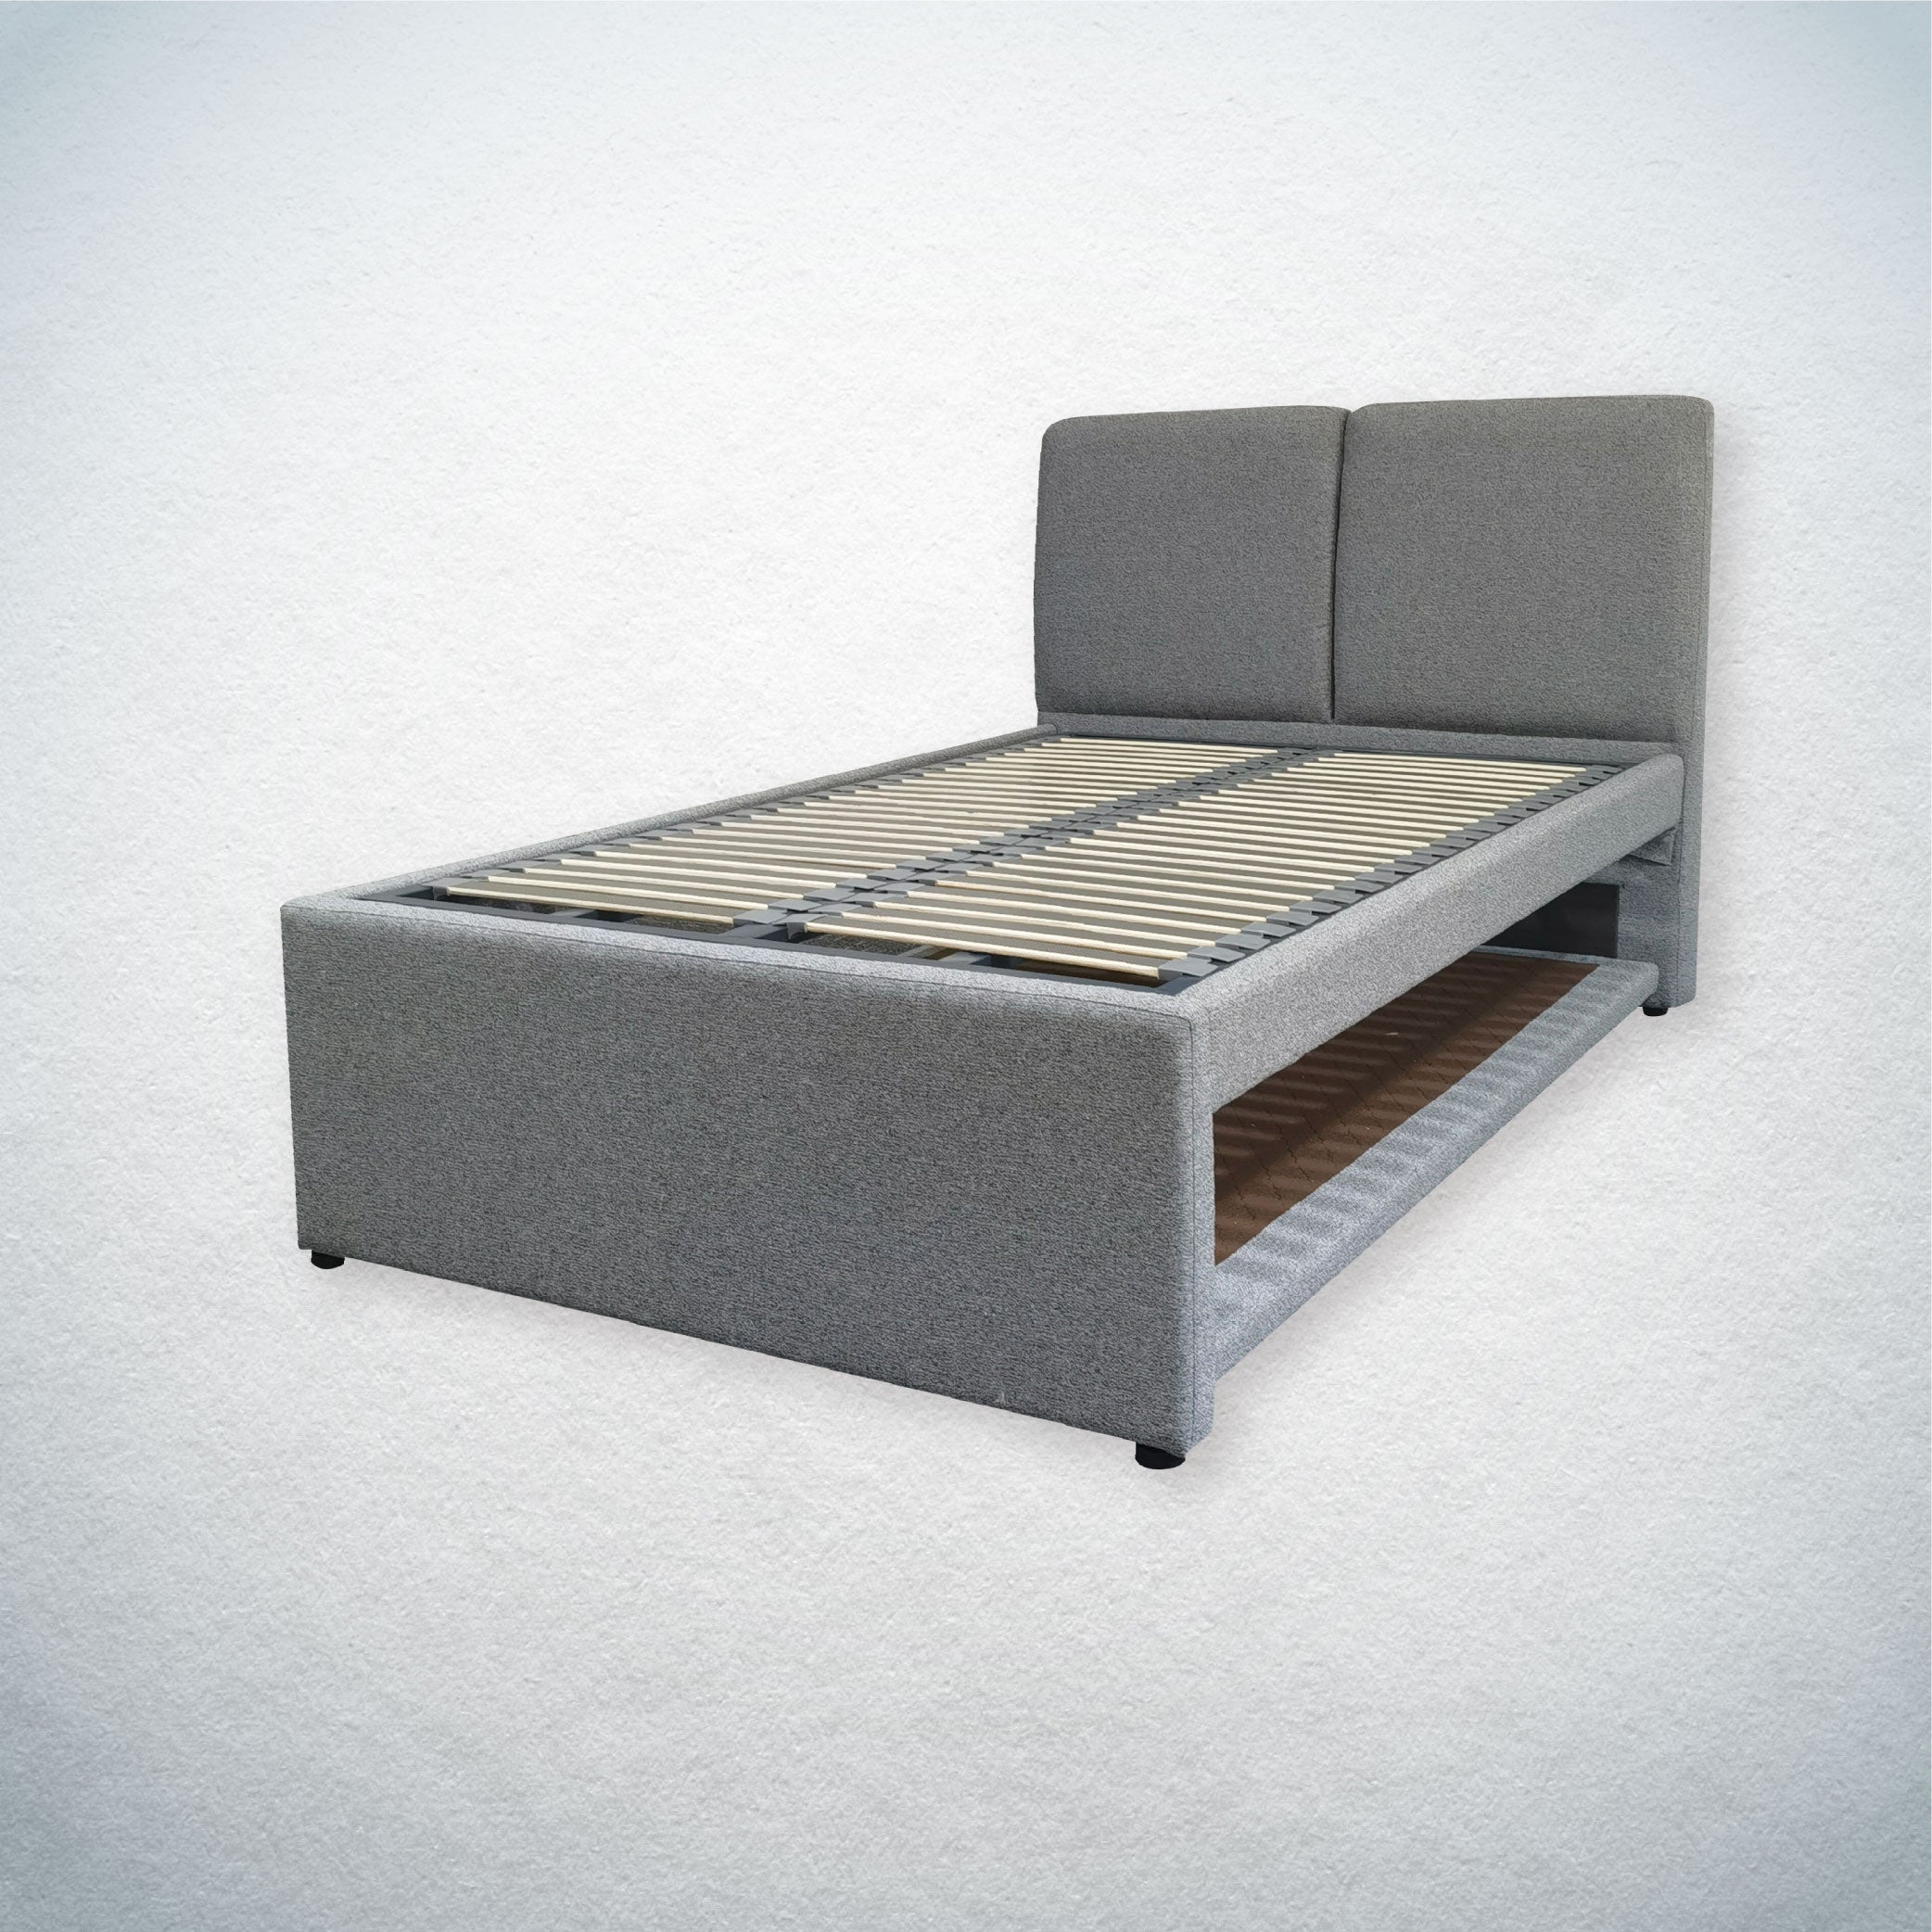 Simple Pull-out Bed Frame